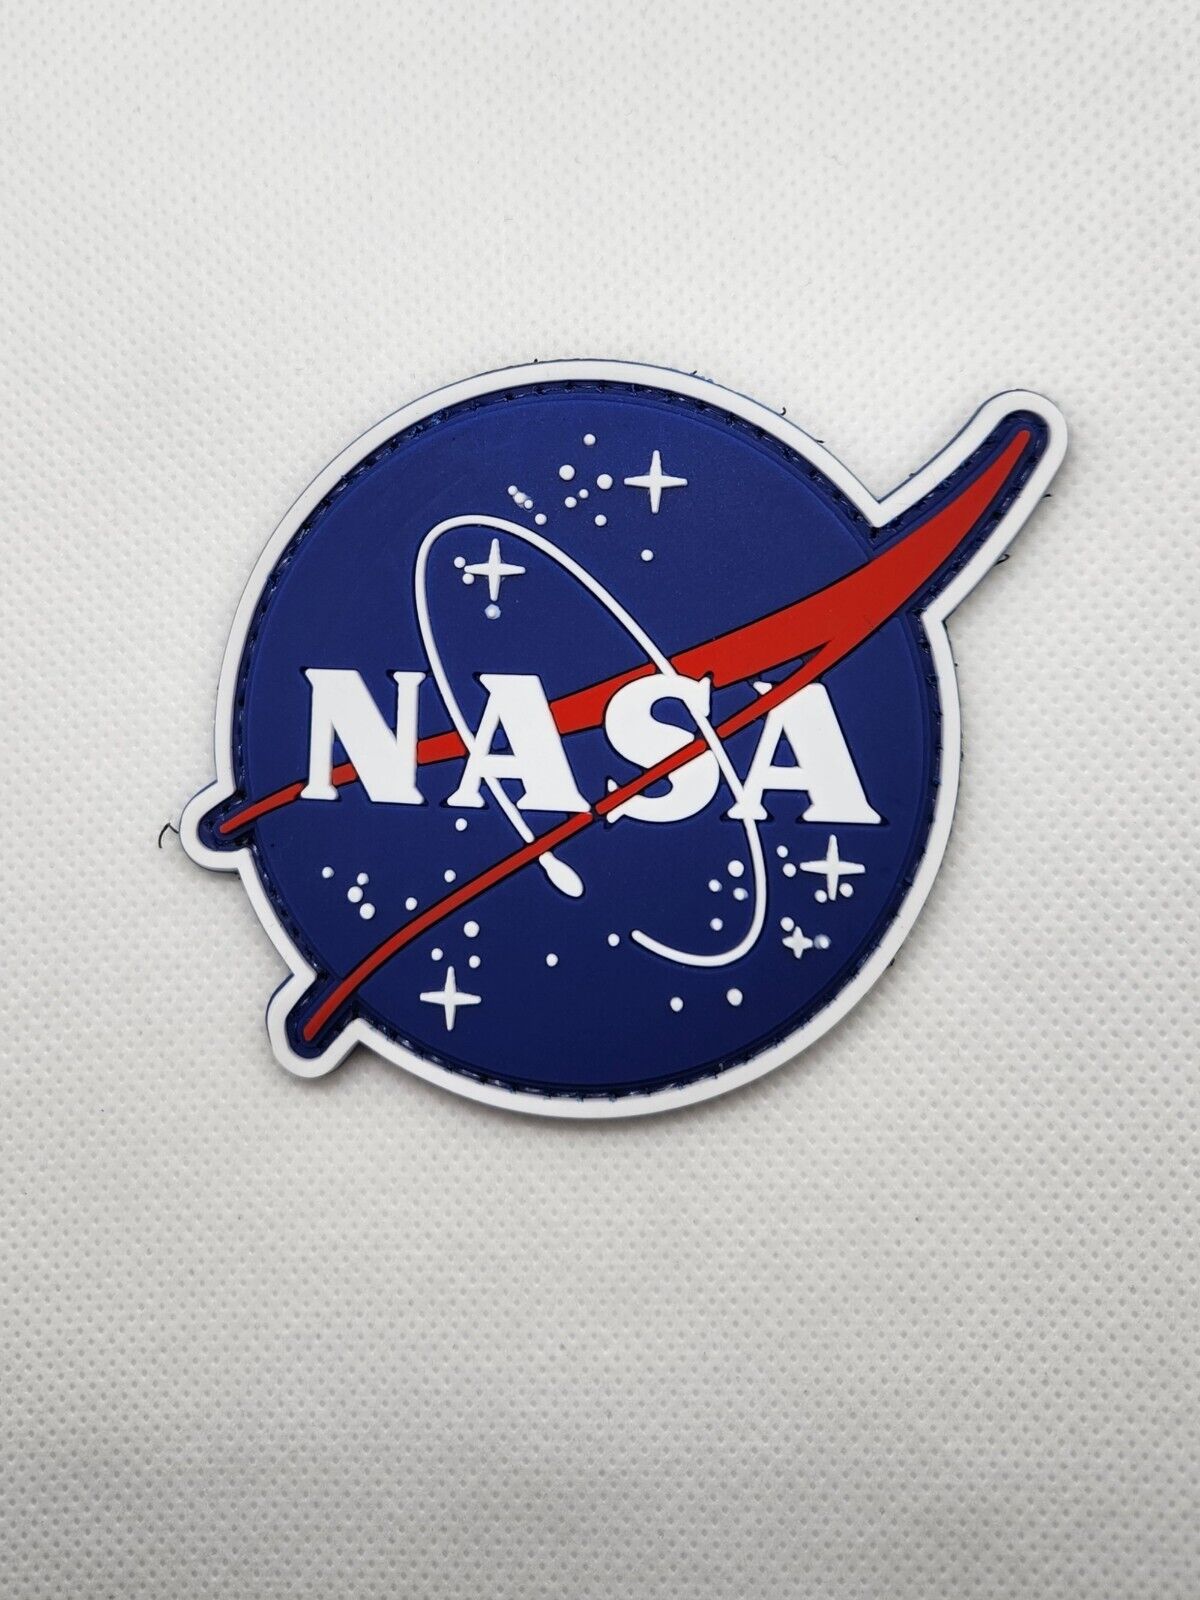 Nasa 3D PVC Tactical Morale Patch – Hook Backed